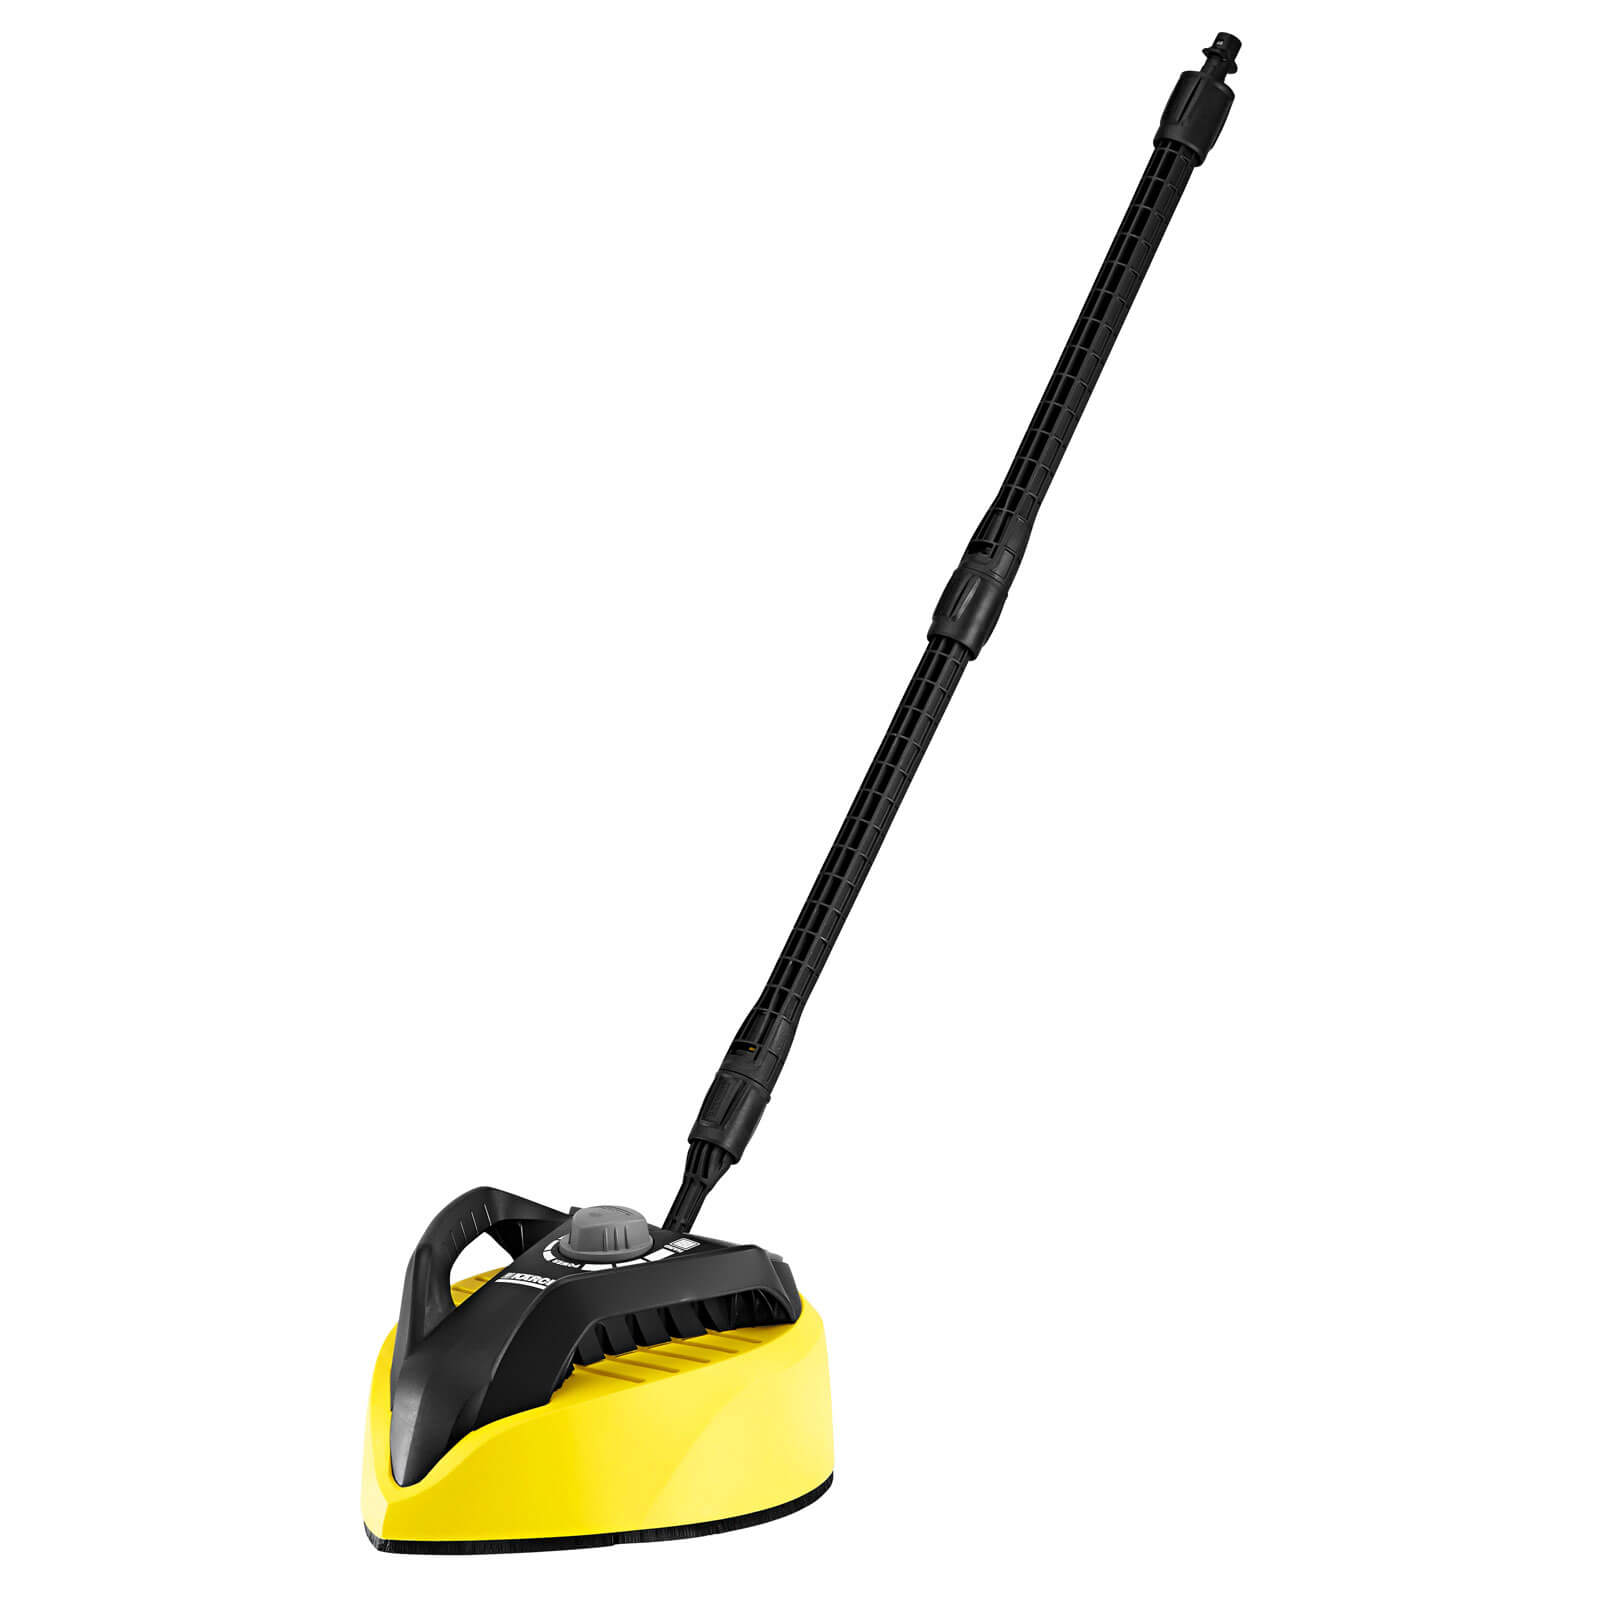 Karcher T450 Patio Cleaner Attachment for K4 - K7 Pressure Washers